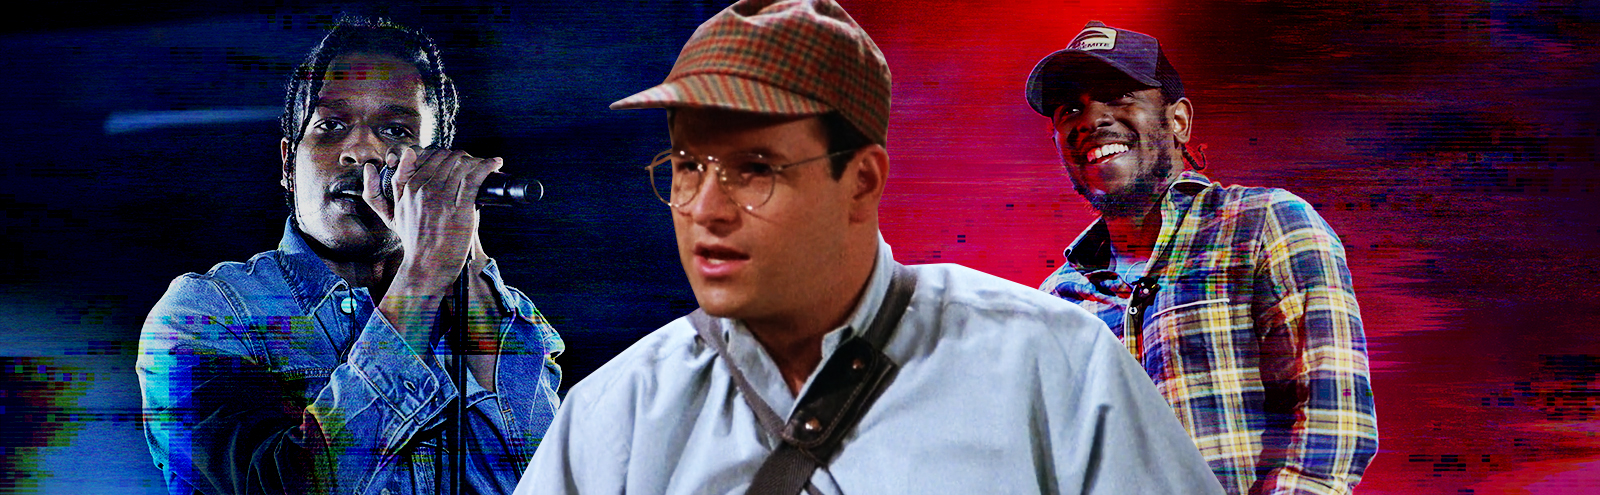 TBT: George Costanza Is The Decade's Biggest Style Icon :  r/malefashionadvice